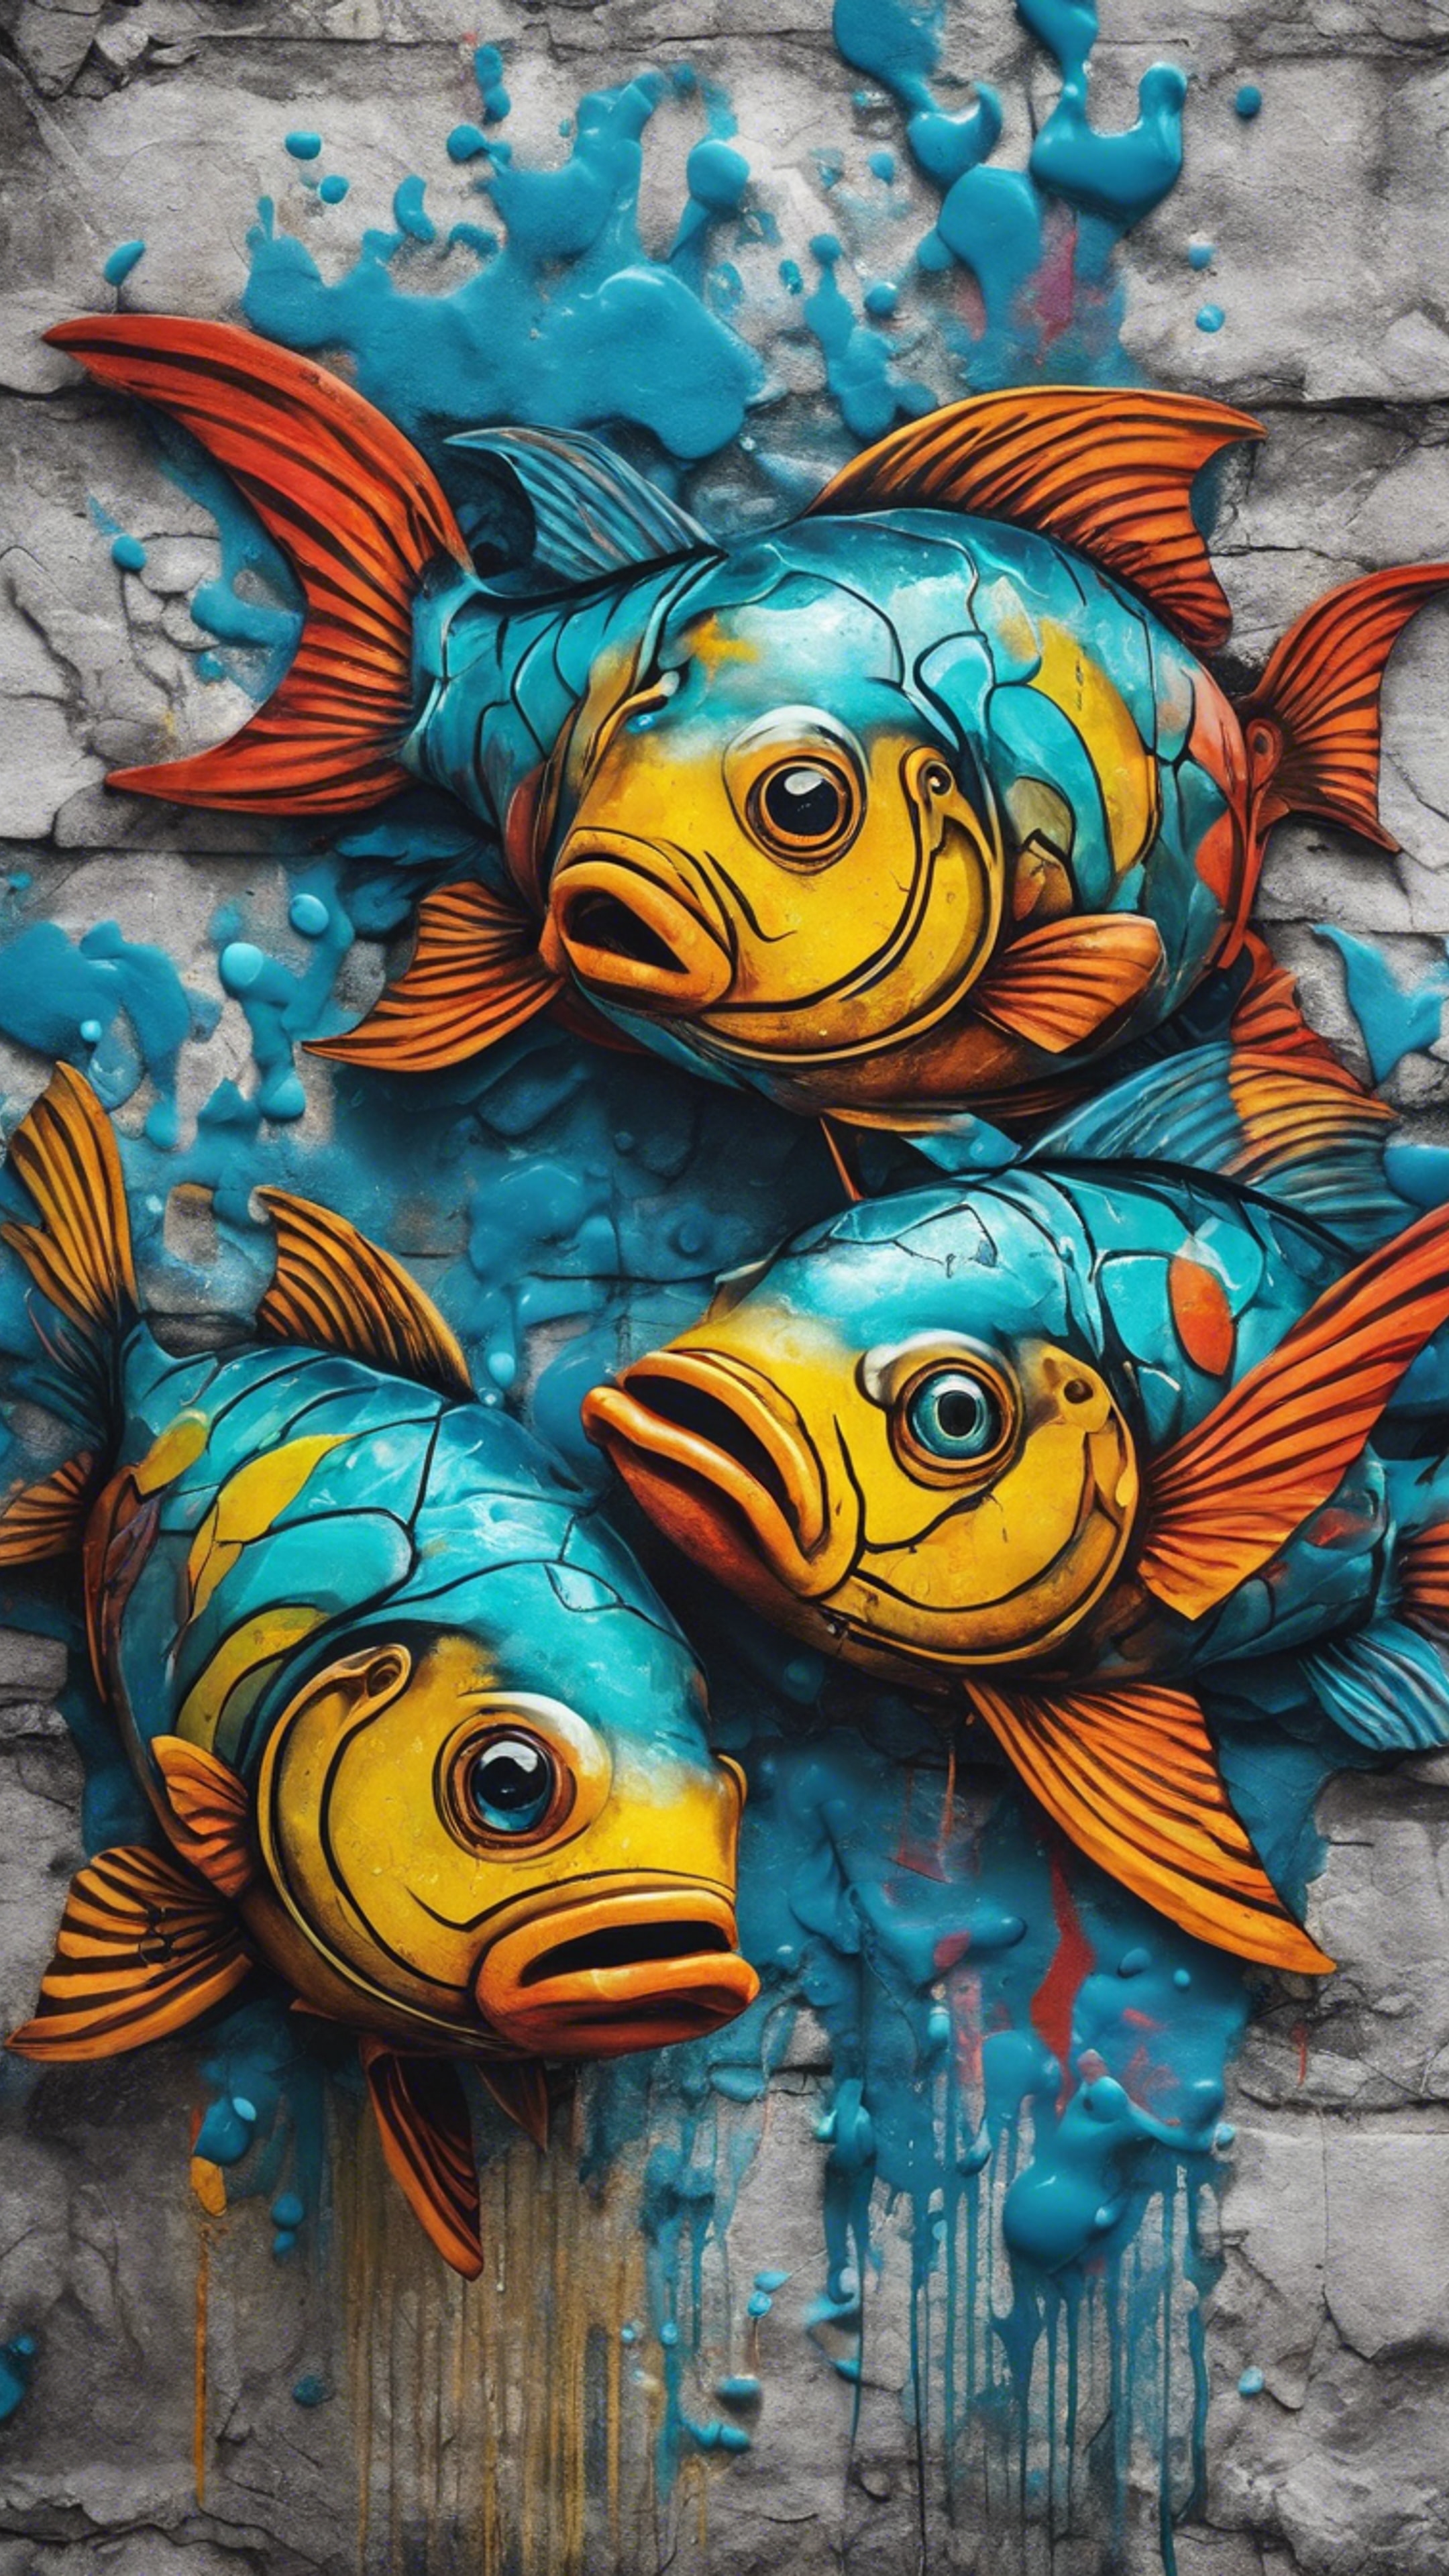 A vibrant street art depicting Pisces as two playful fish, on a textured wall with dynamic splashes of color. ផ្ទាំង​រូបភាព[a1e08805c6ad437f94cb]